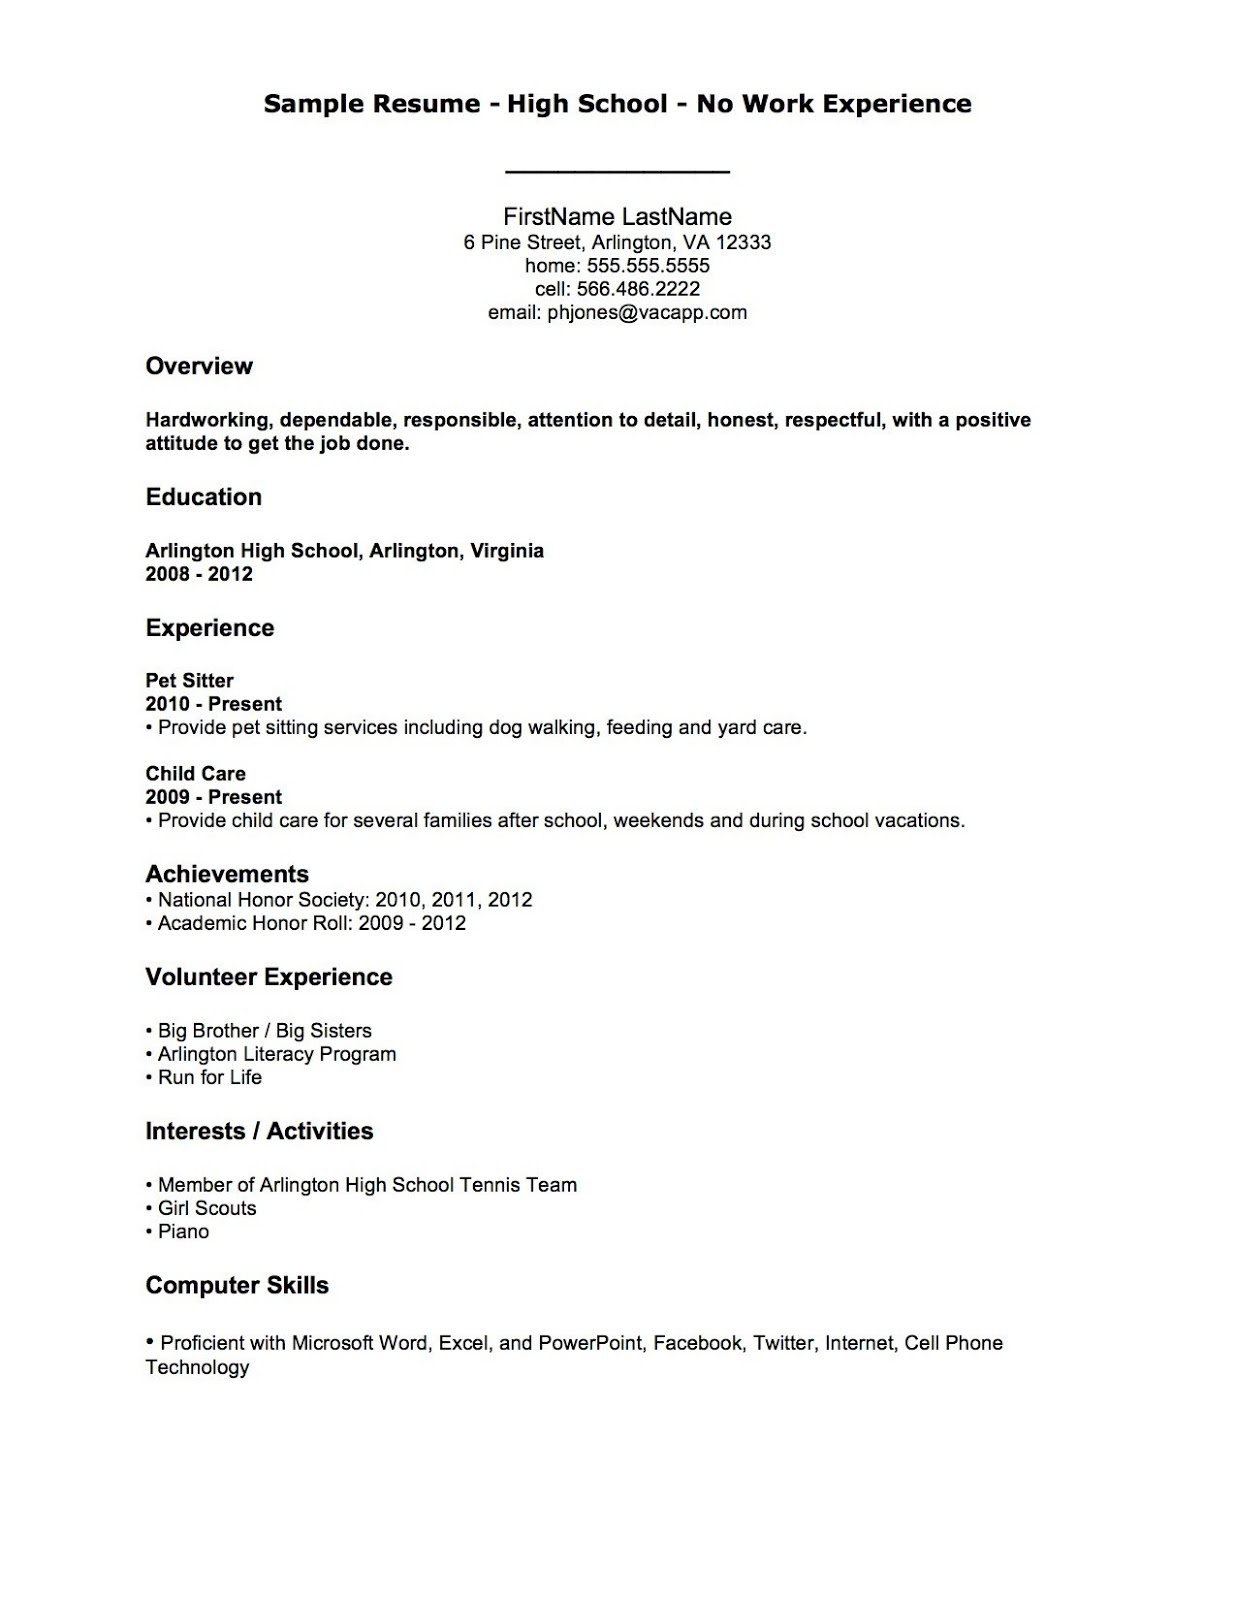 resume ideas for first job